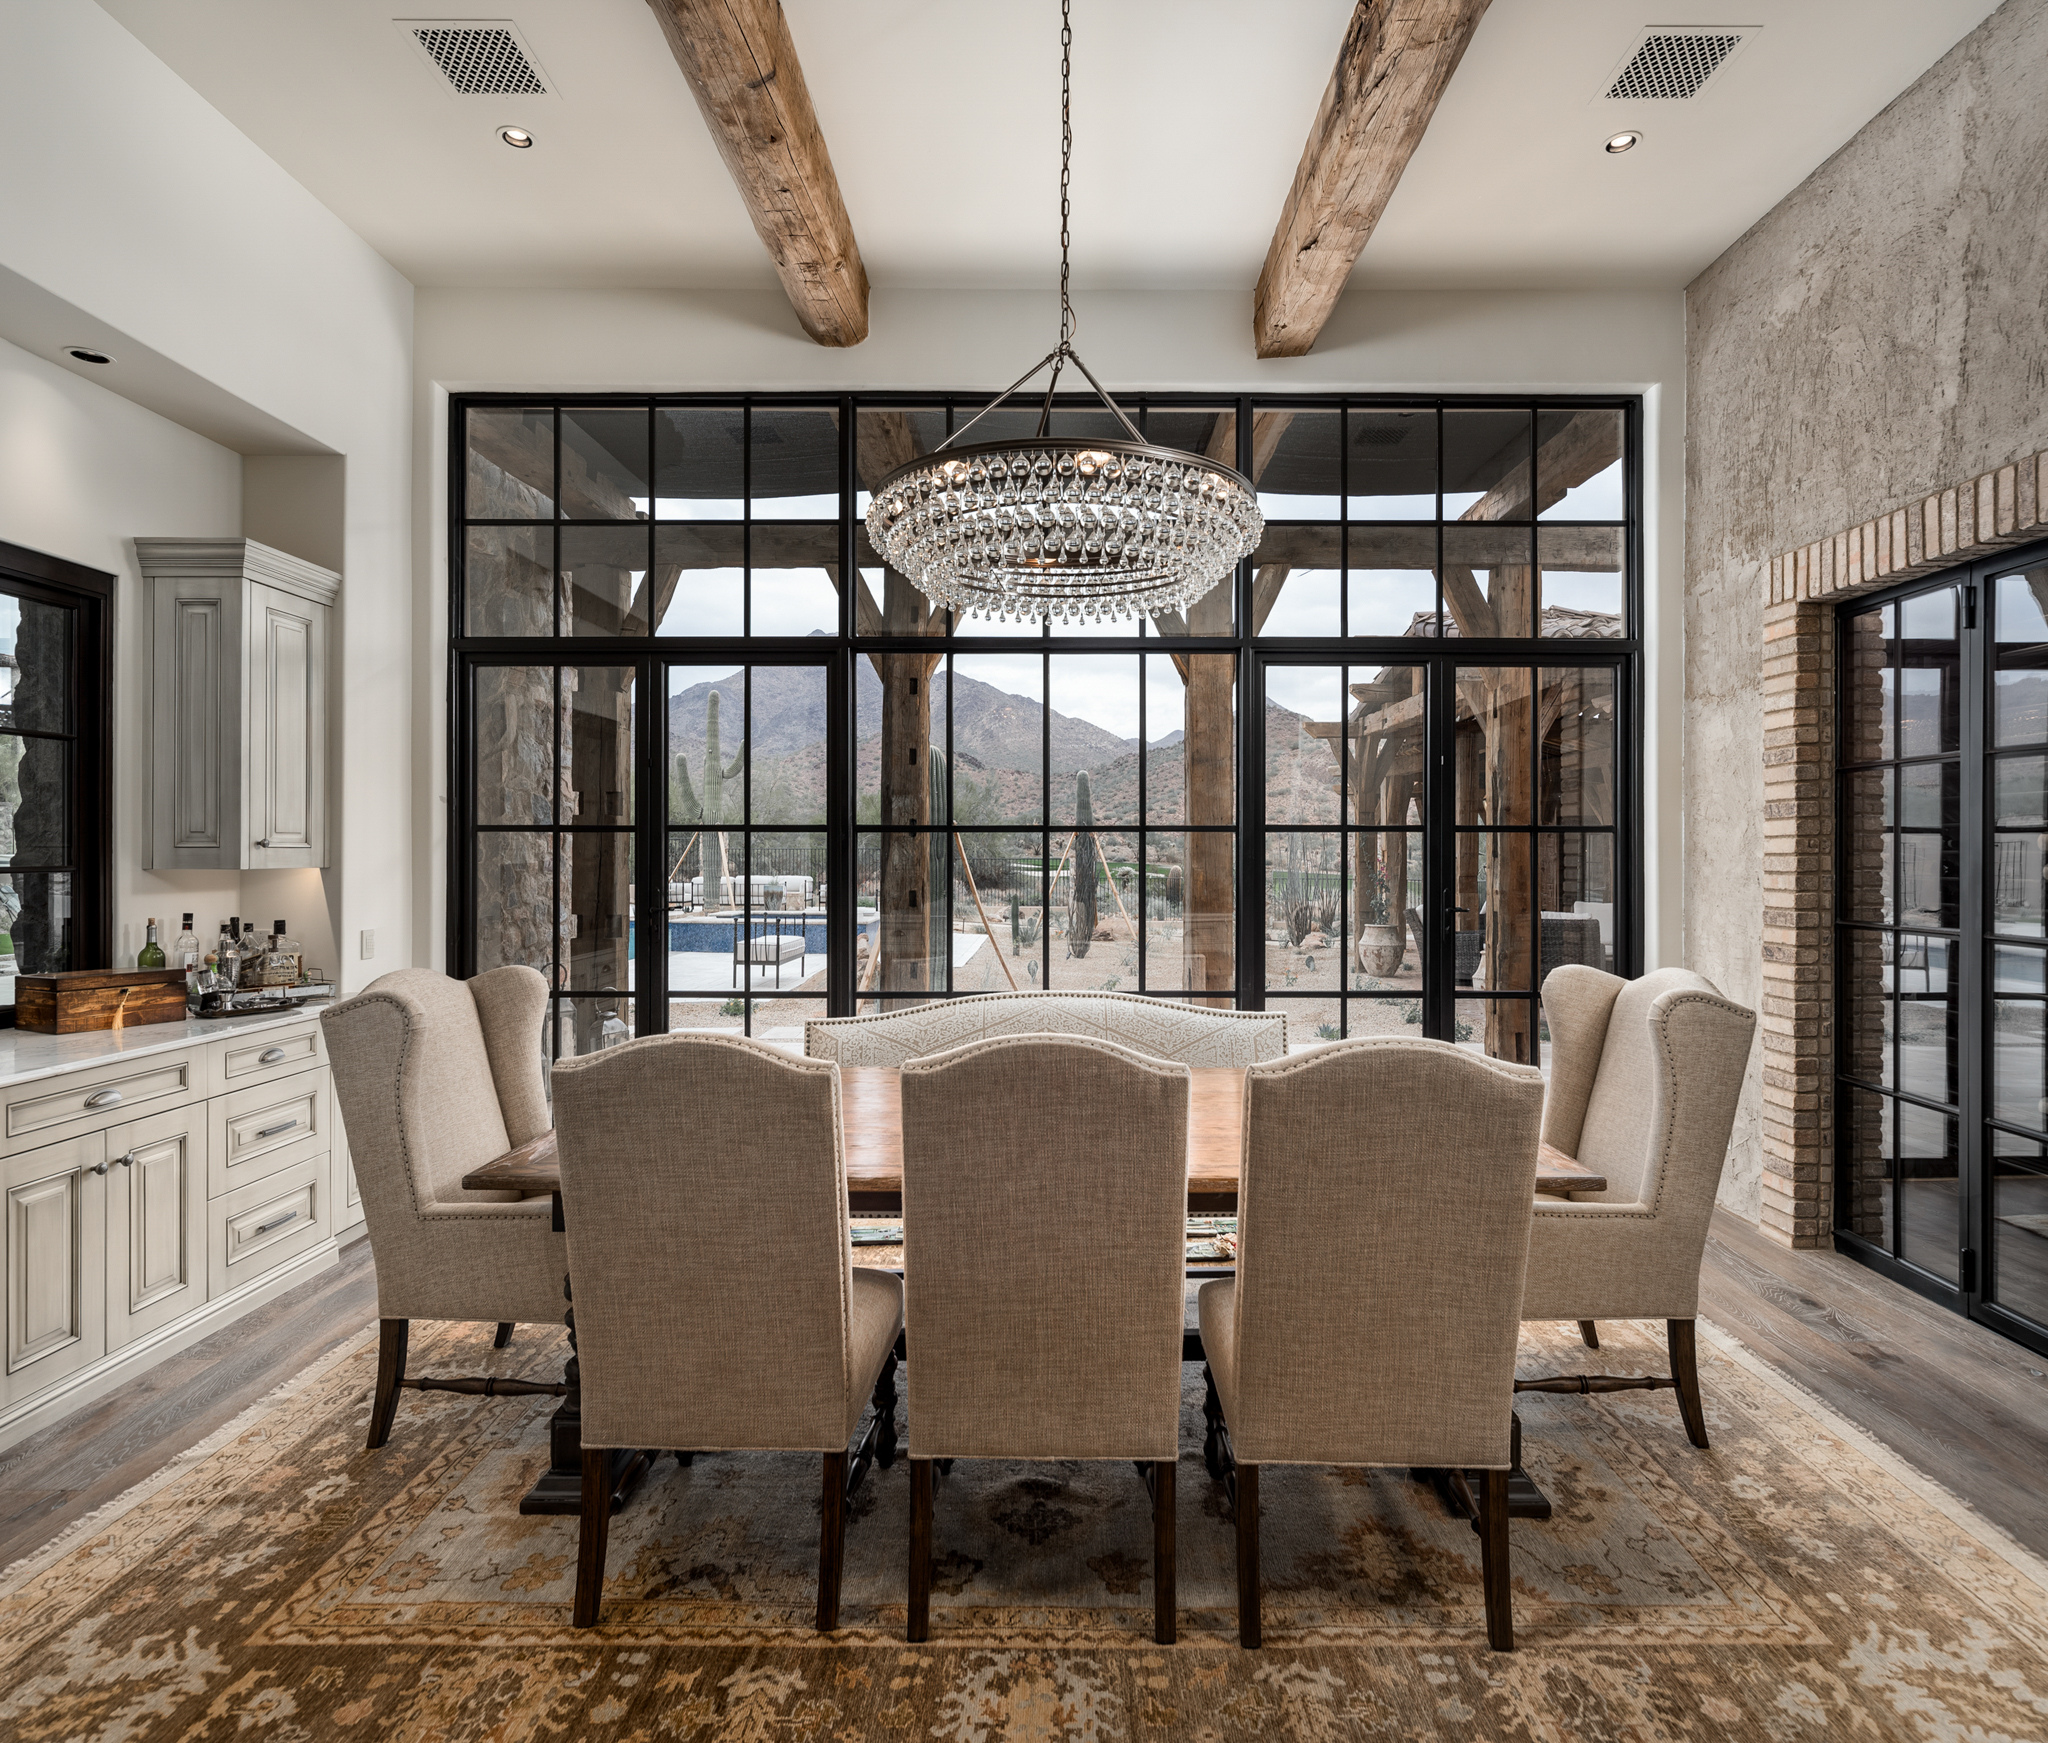 A beautifully designed dining room featuring a large rectangular wooden table surrounded by upholstered high-back chairs. The room has a rustic charm with exposed wooden beams on the ceiling and a large, elegant chandelier hanging above the table. The back wall is composed of expansive floor-to-ceiling windows with black frames, providing a stunning view of the outdoor scenery and mountains. The room is further enhanced by a vintage-style area rug and light wood flooring. Adjacent to the dining area, built-in cabinetry provides additional storage and complements the overall aesthetic. The natural light and open layout create a warm and inviting atmosphere.